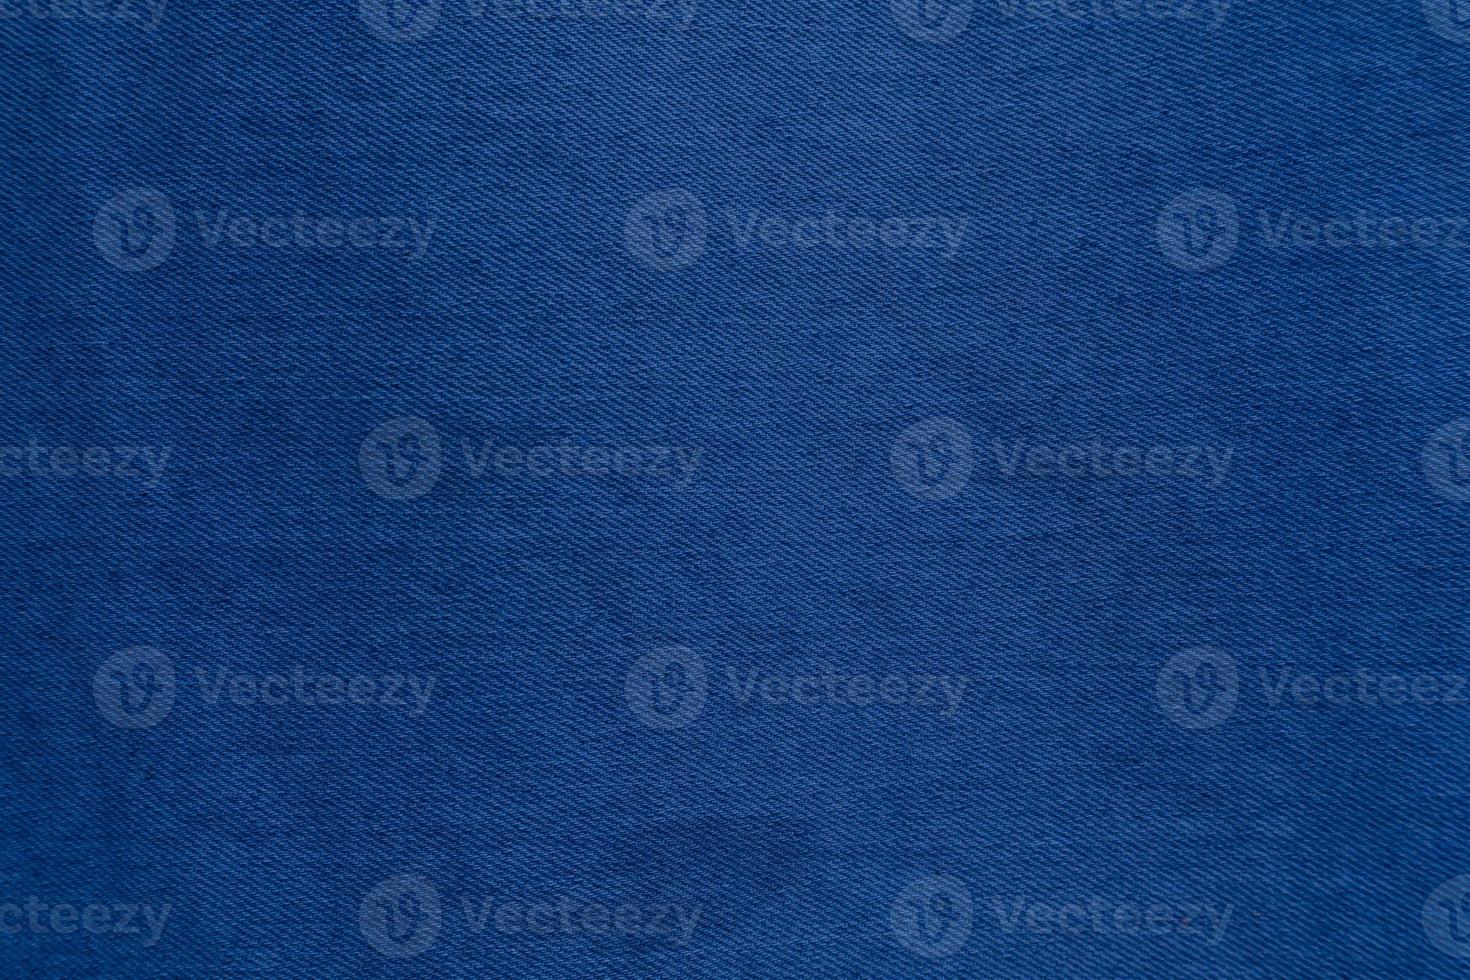 Dark Blue denim fabric texture background, the strong cotton cloth used especially to make jeans. photo